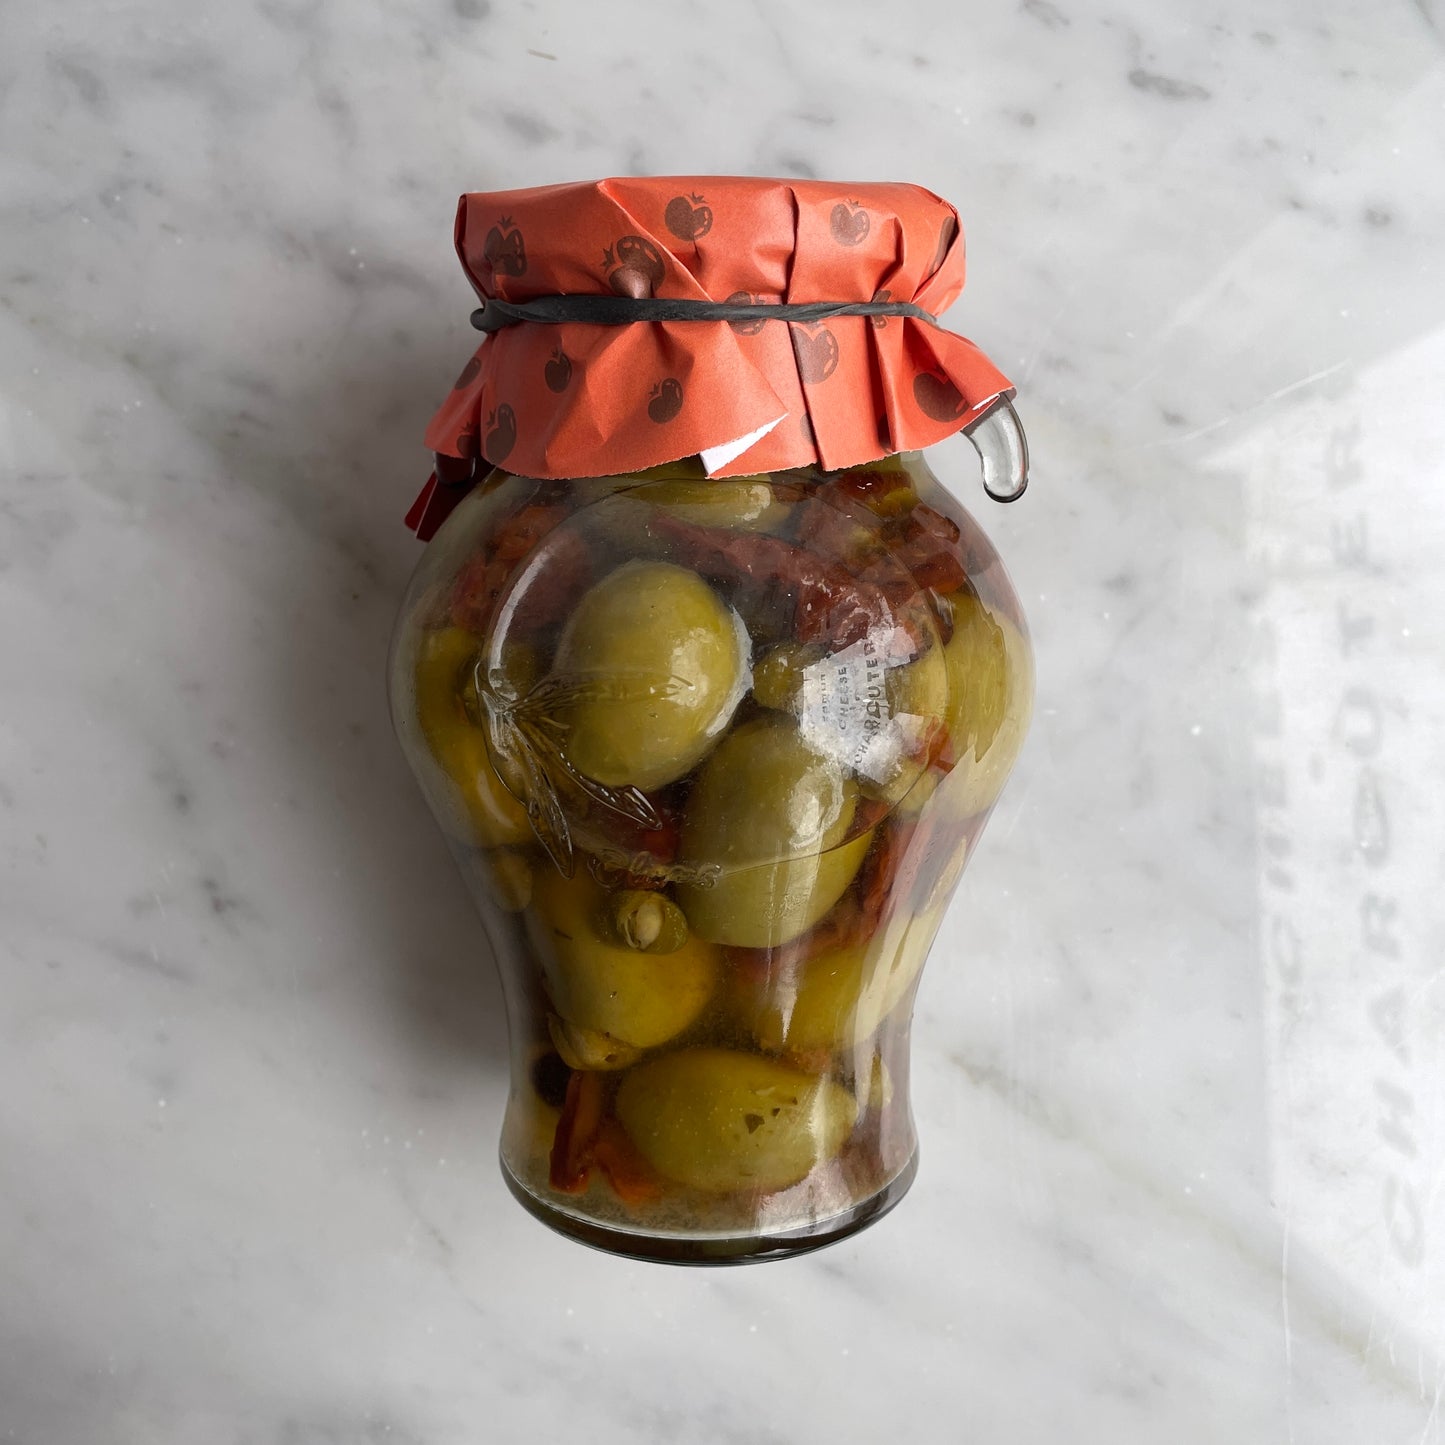 Gordal Olives with sundried tomatoes and capers in amphora